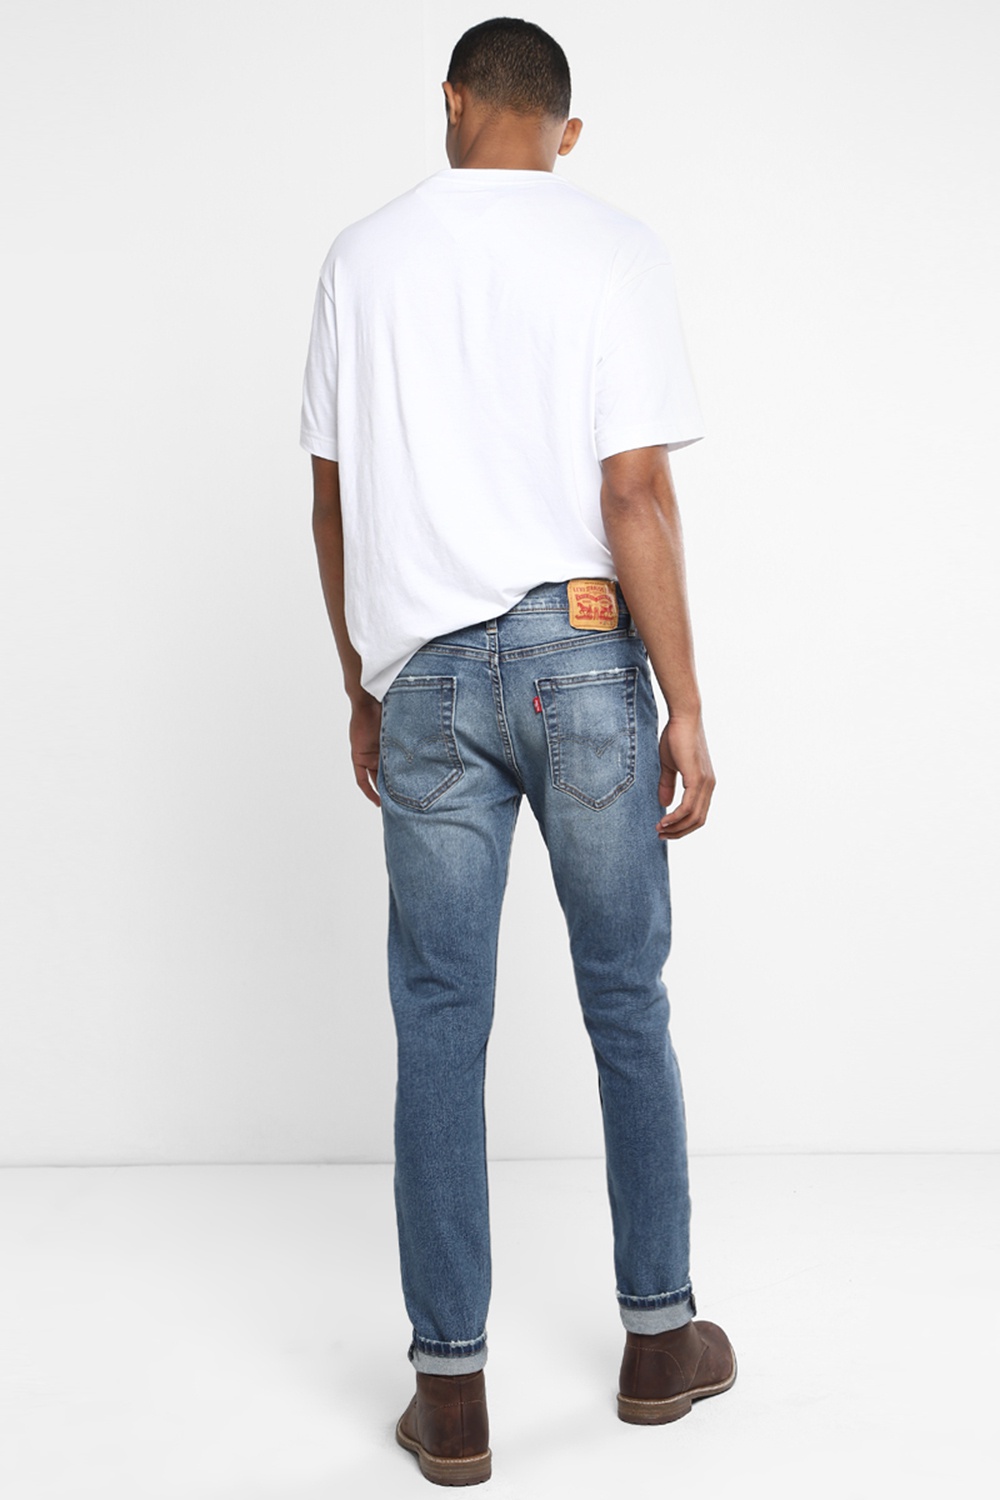 jeans similar to levis 512